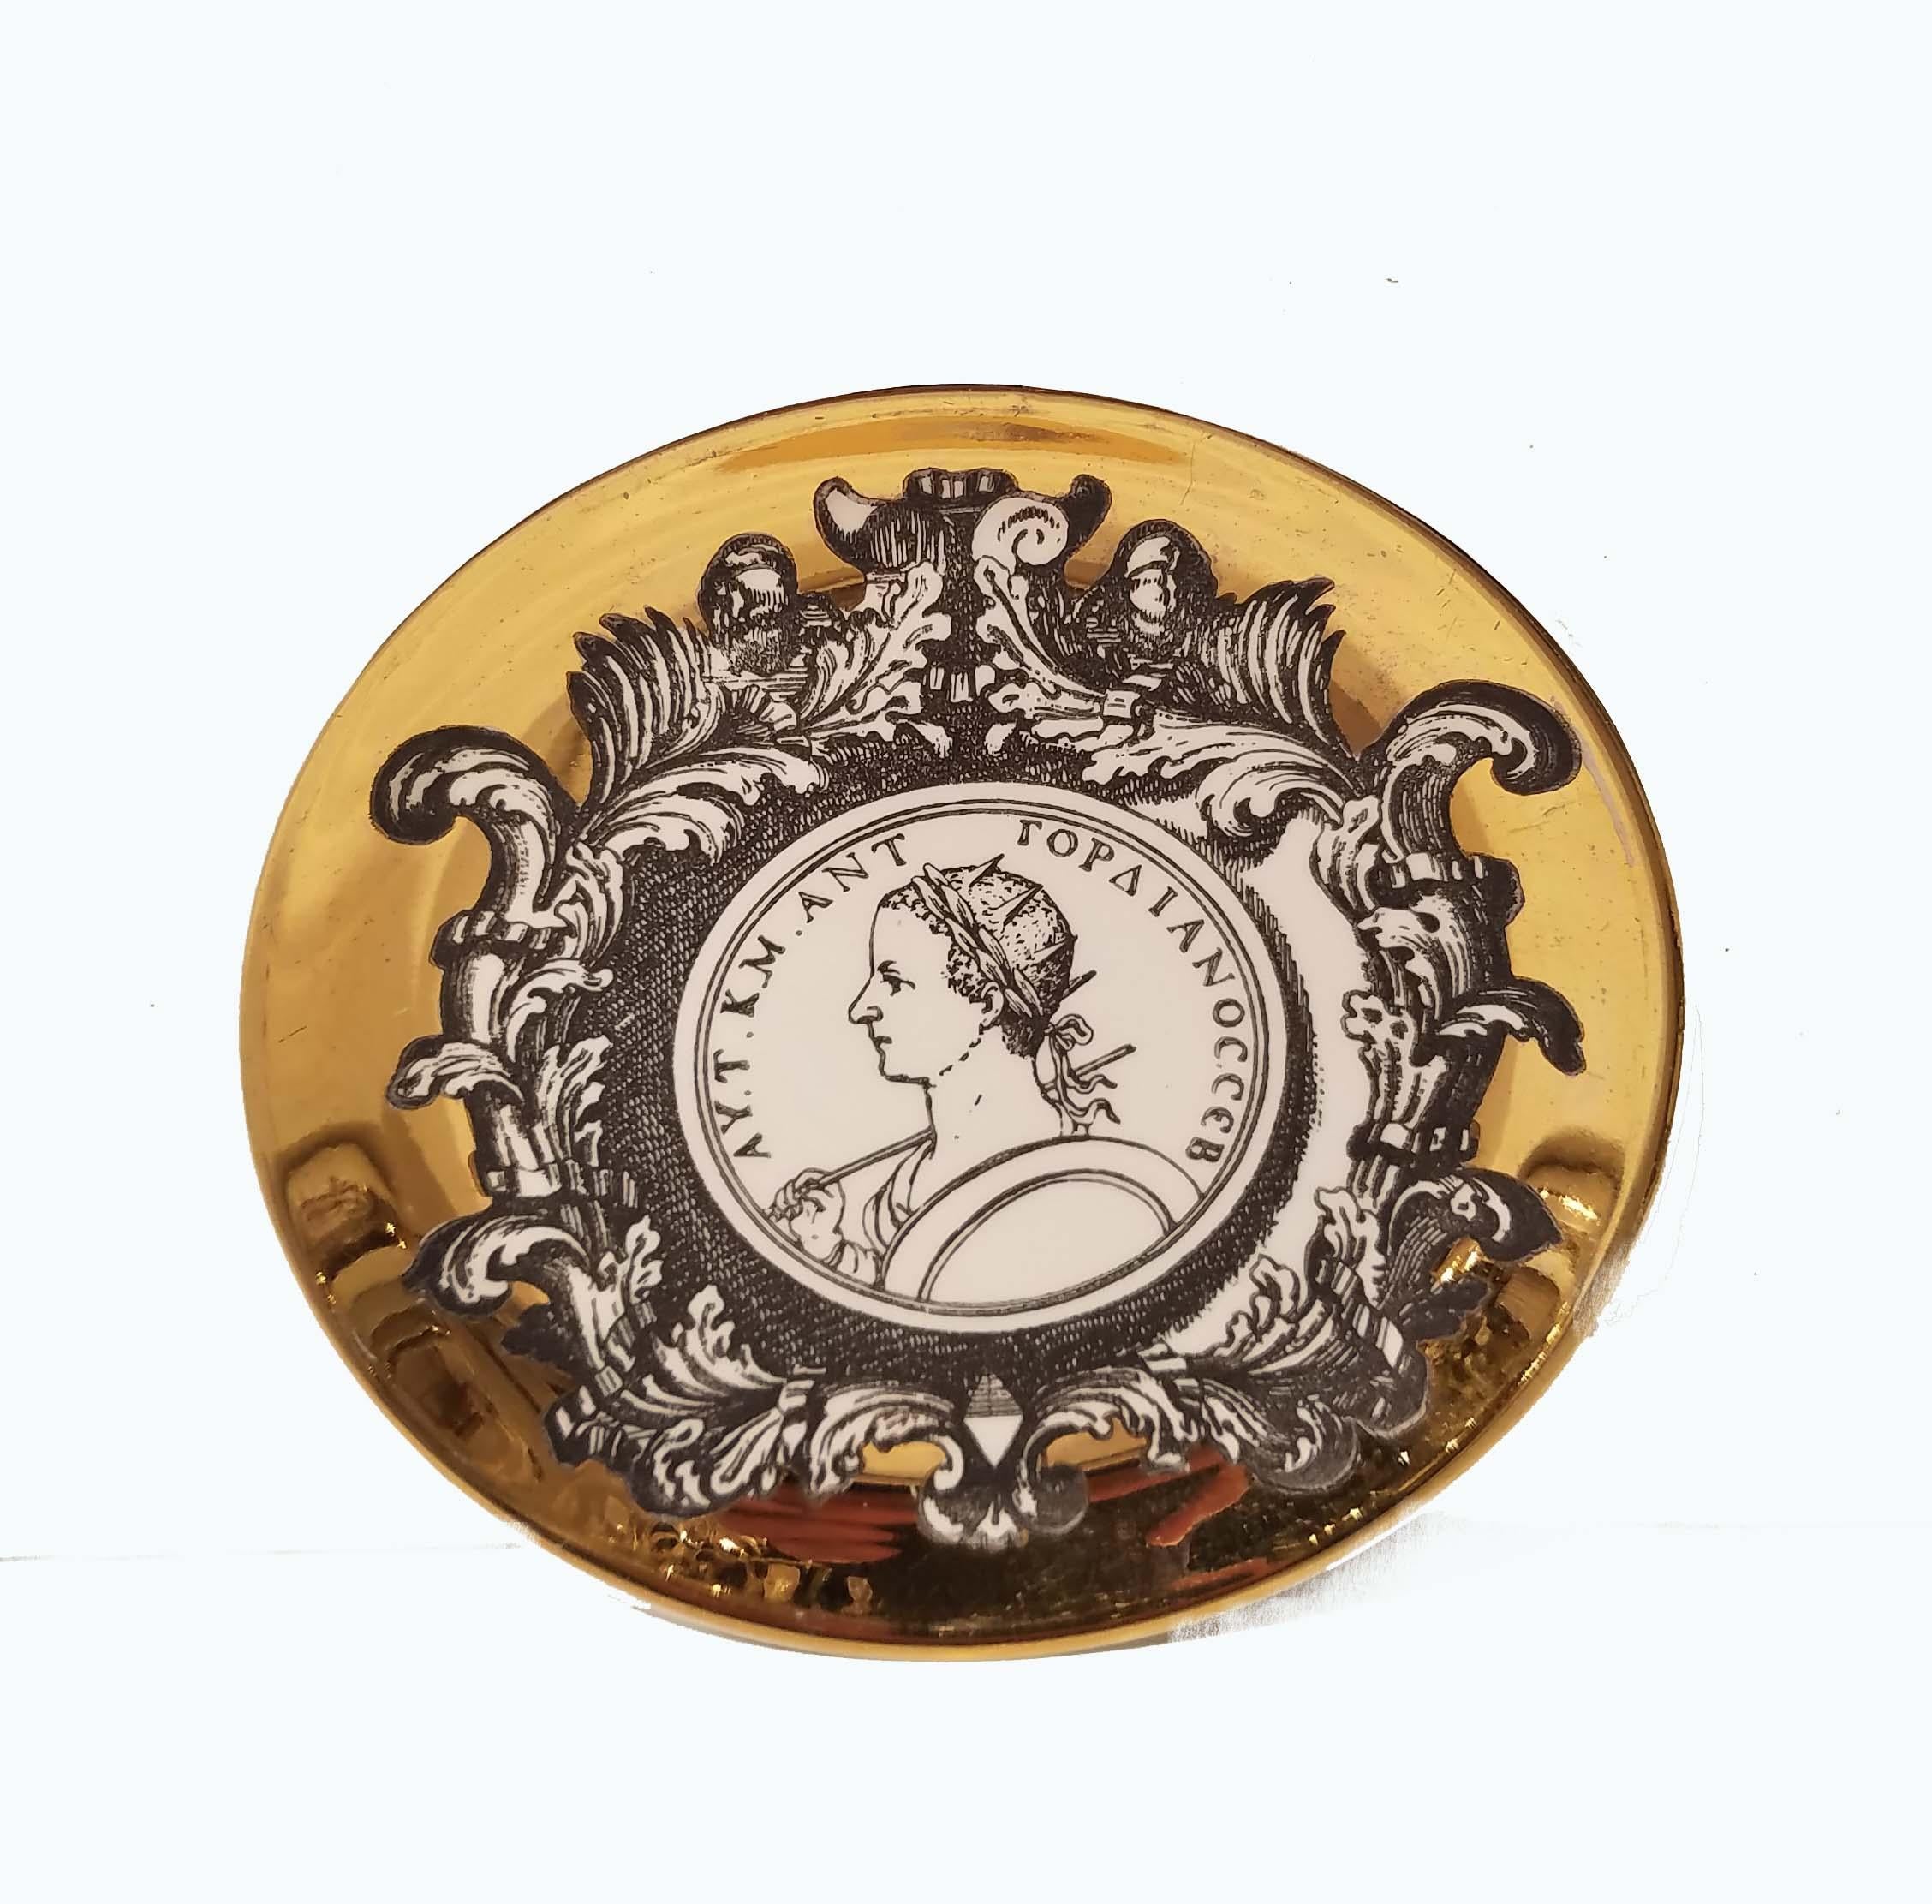 Piero Fornasetti (1913-1988)
'PROFILI ROMANI', A set of eight coasters, 1950-1960
lithographically-decorated and hand painted
Measures: 4 in. (10 cm.) diameter
with printed retailer’s label Fornasetti, Milano, made in Italy.